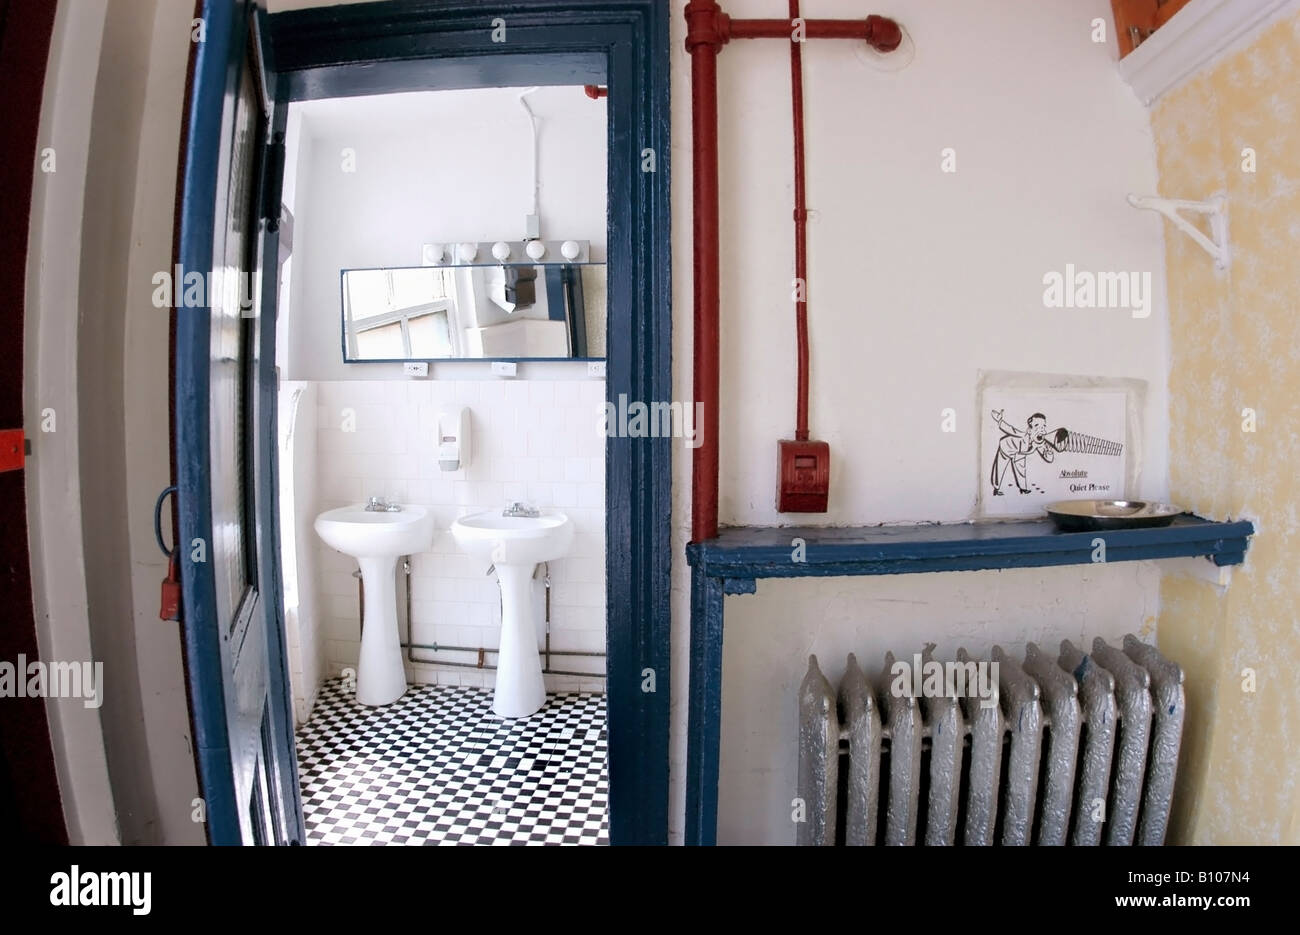 New York, Bowery Hotel Flophouse for Men Converted to Low Cost Hostel for Backpackers "White-house of N.Y" Shared Bathroom Interior (Closed) Stock Photo